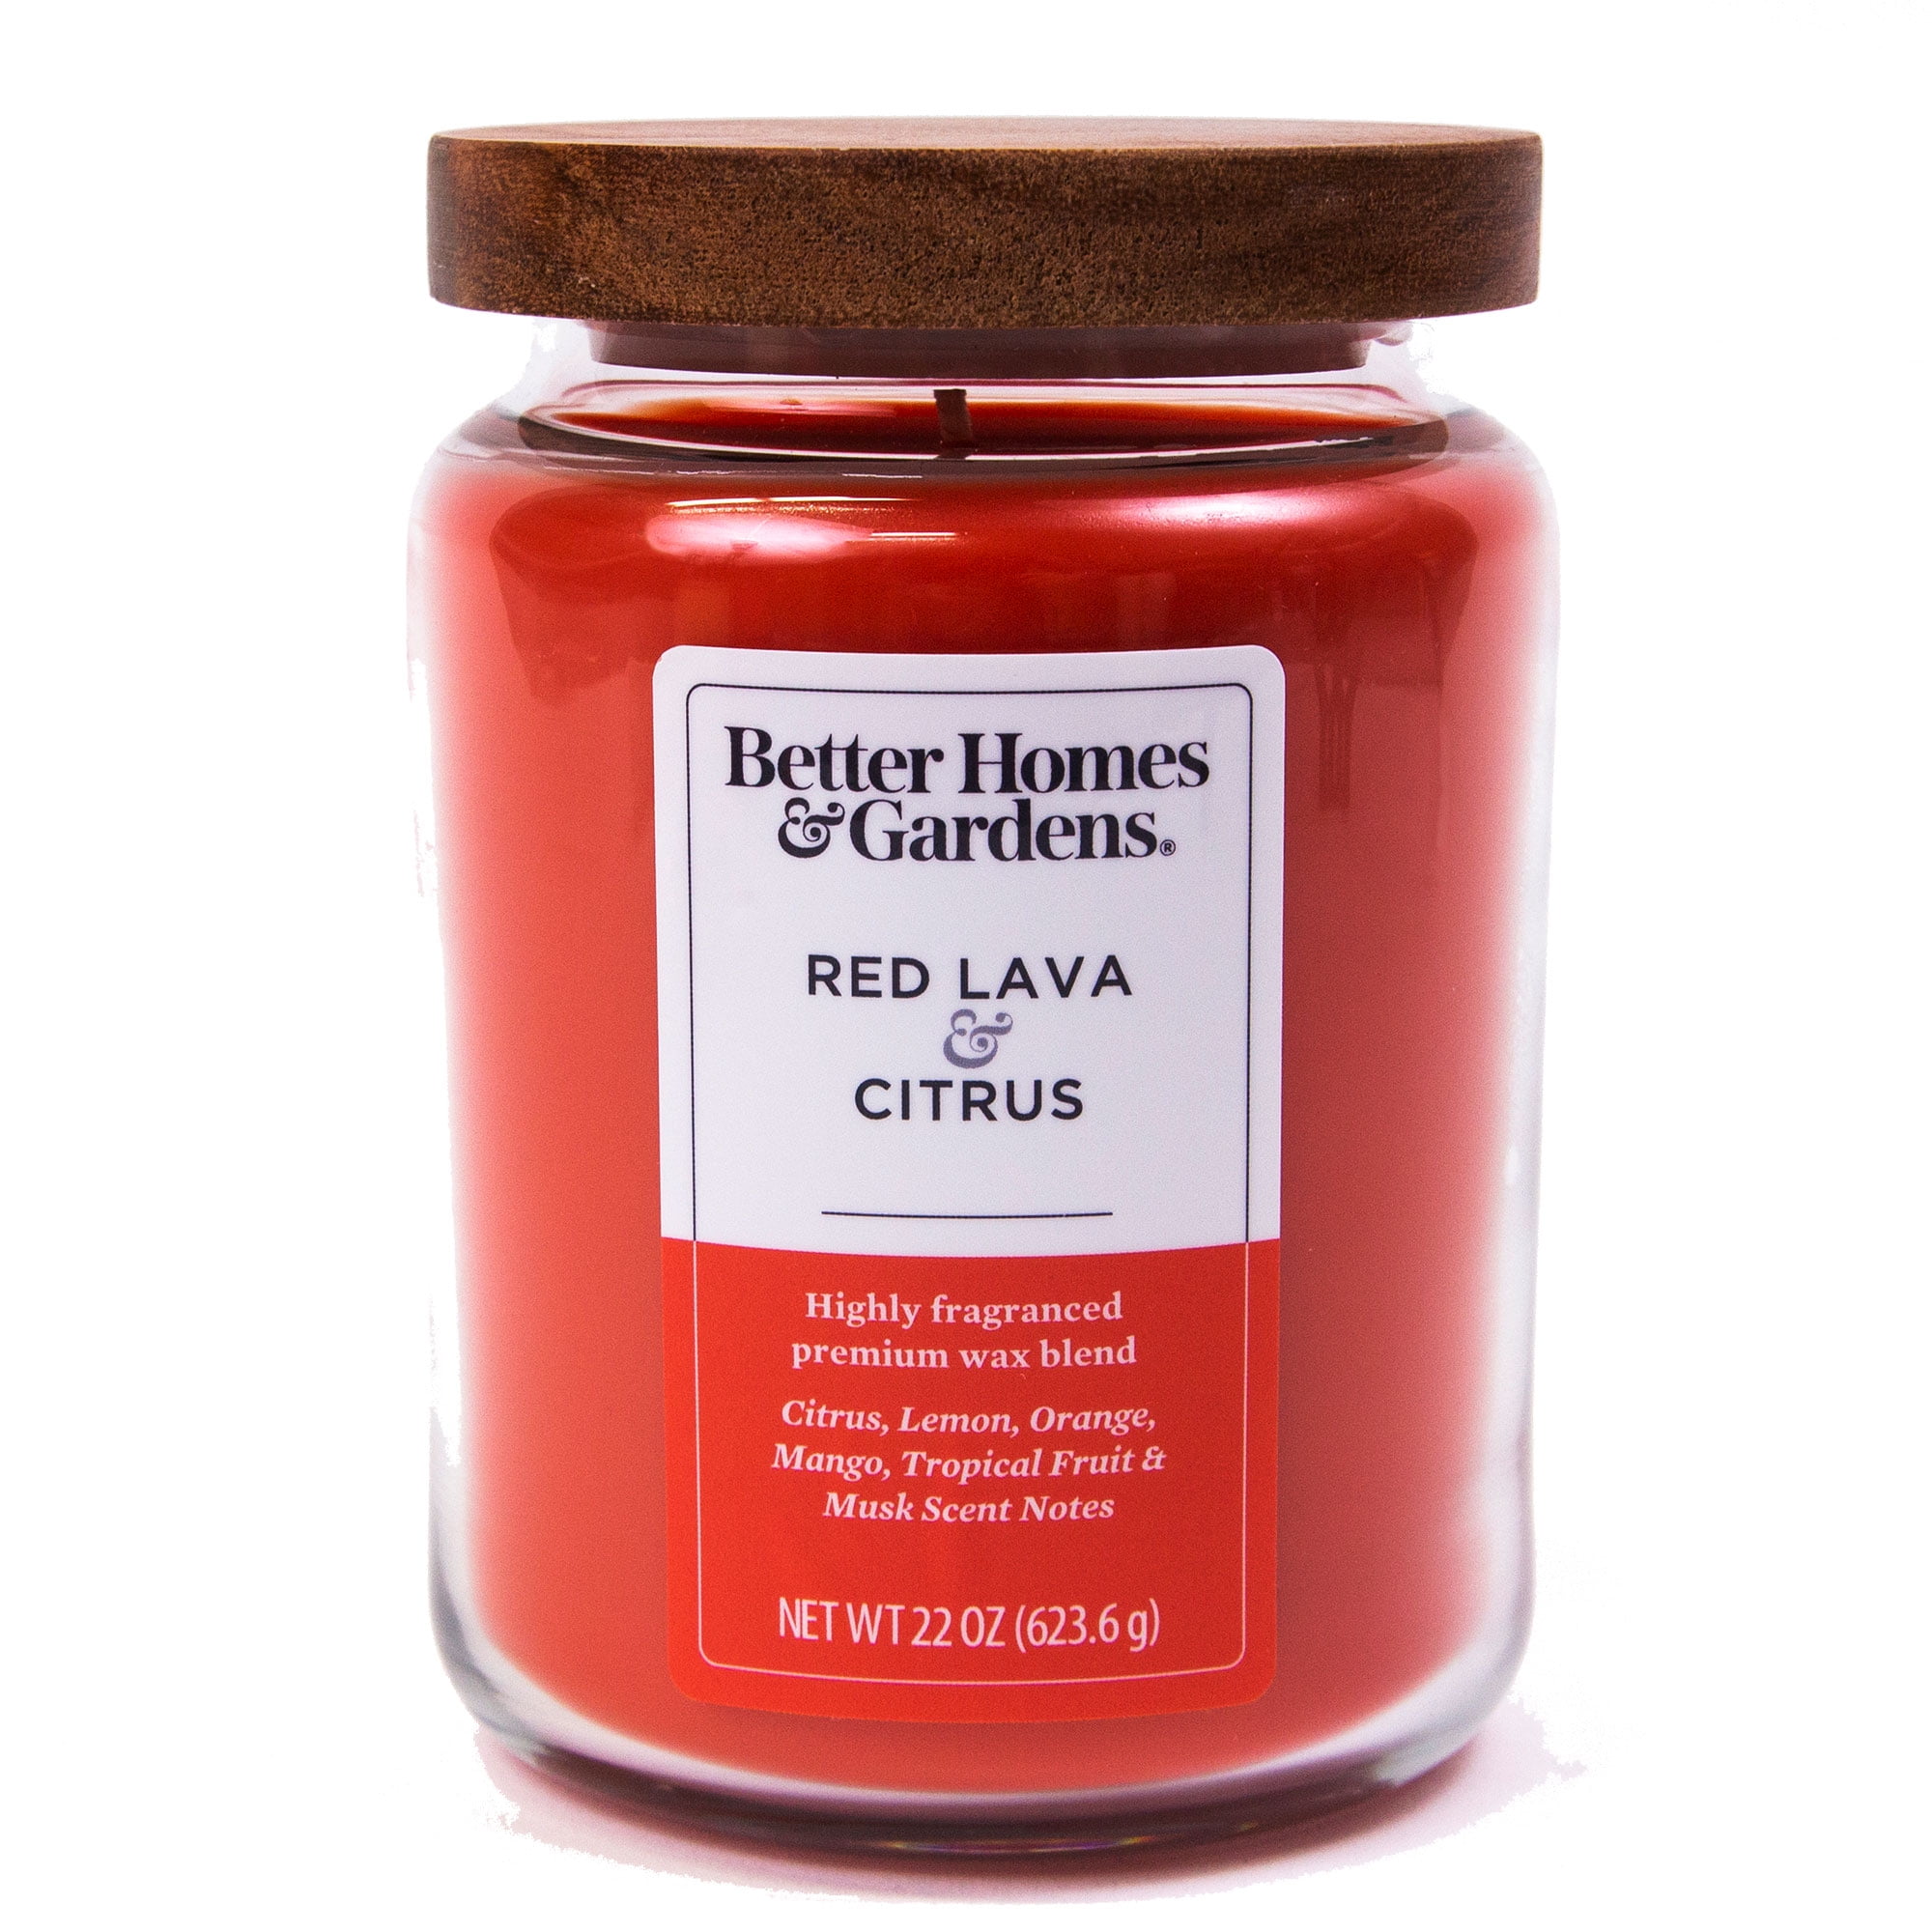 Better Homes & Gardens 22oz Red Lava Citrus Scented Single- Jar Candle